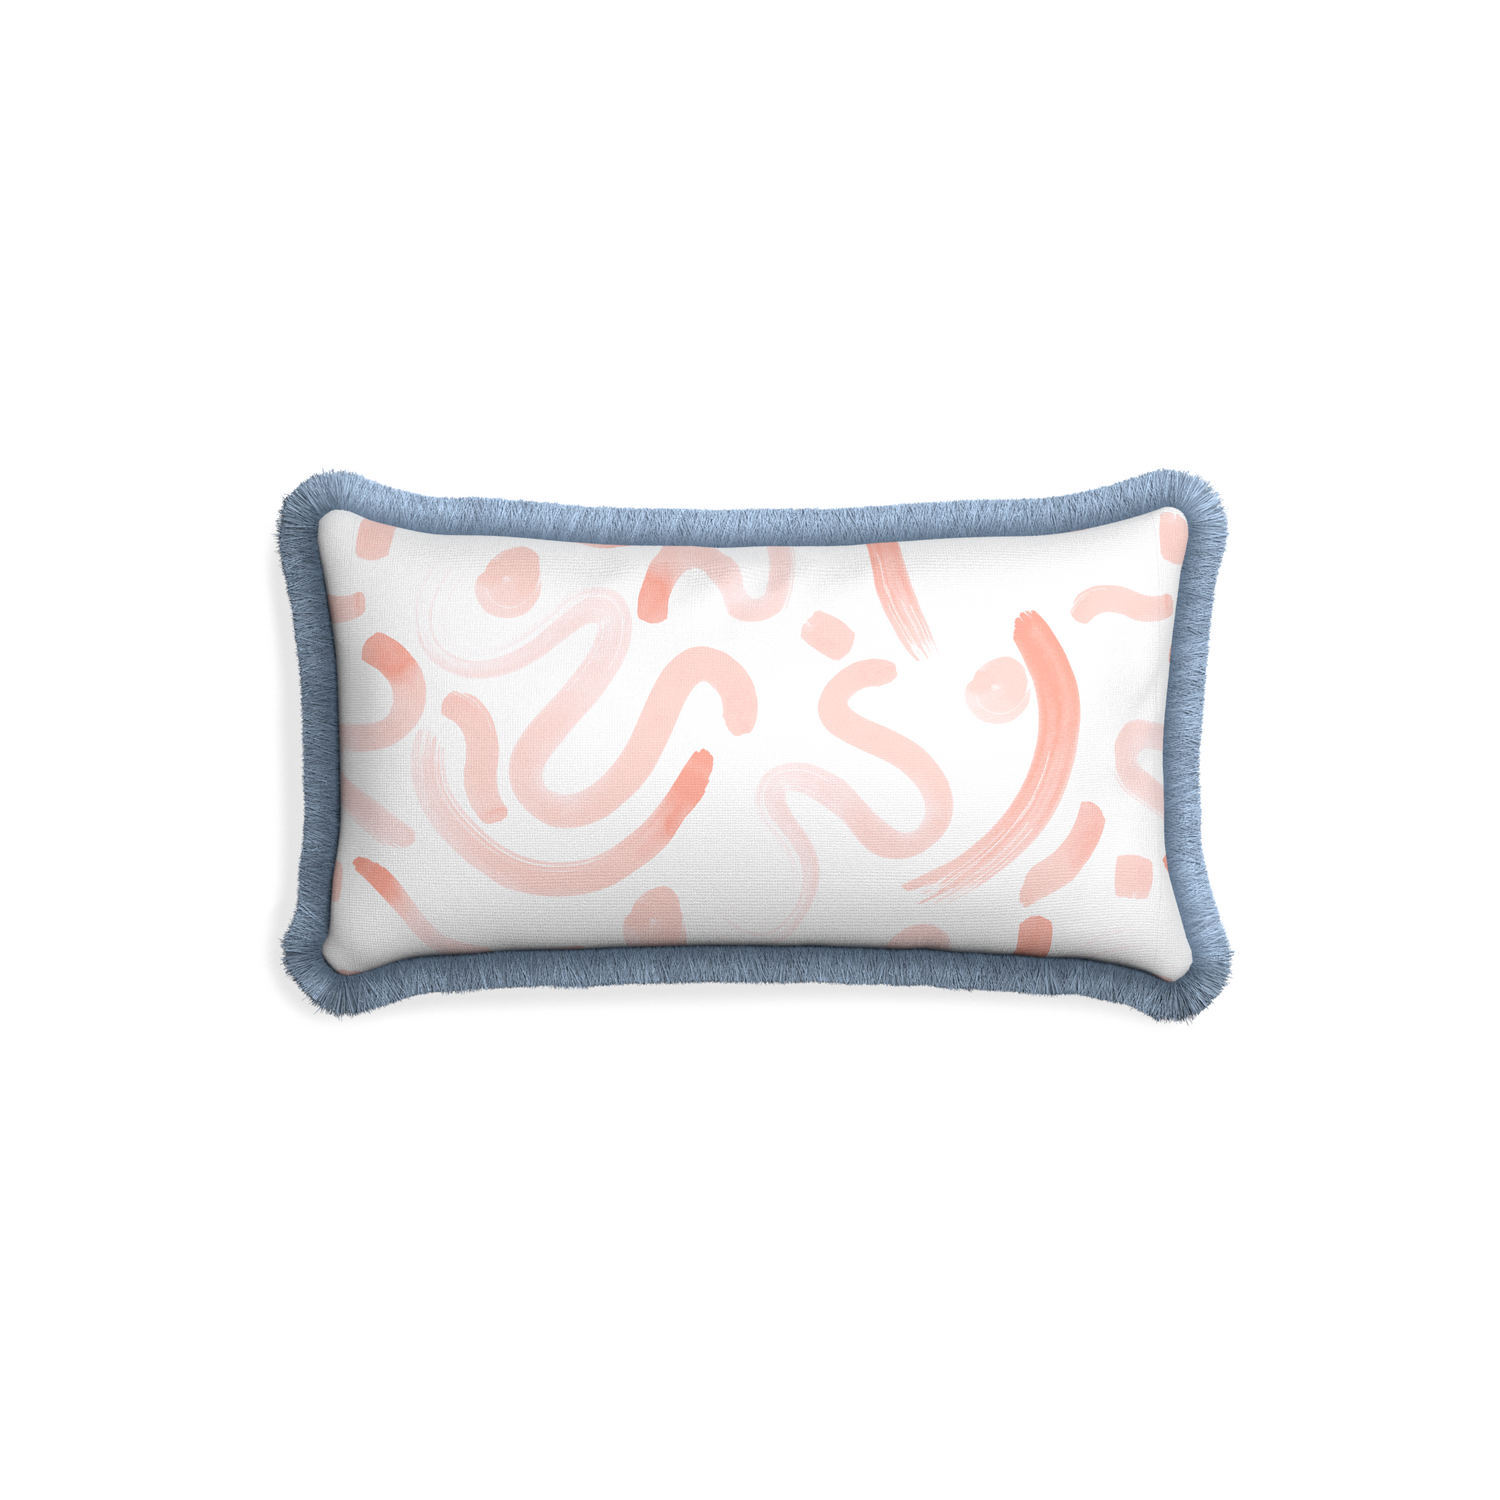 Petite-lumbar hockney pink custom pink graphicpillow with sky fringe on white background